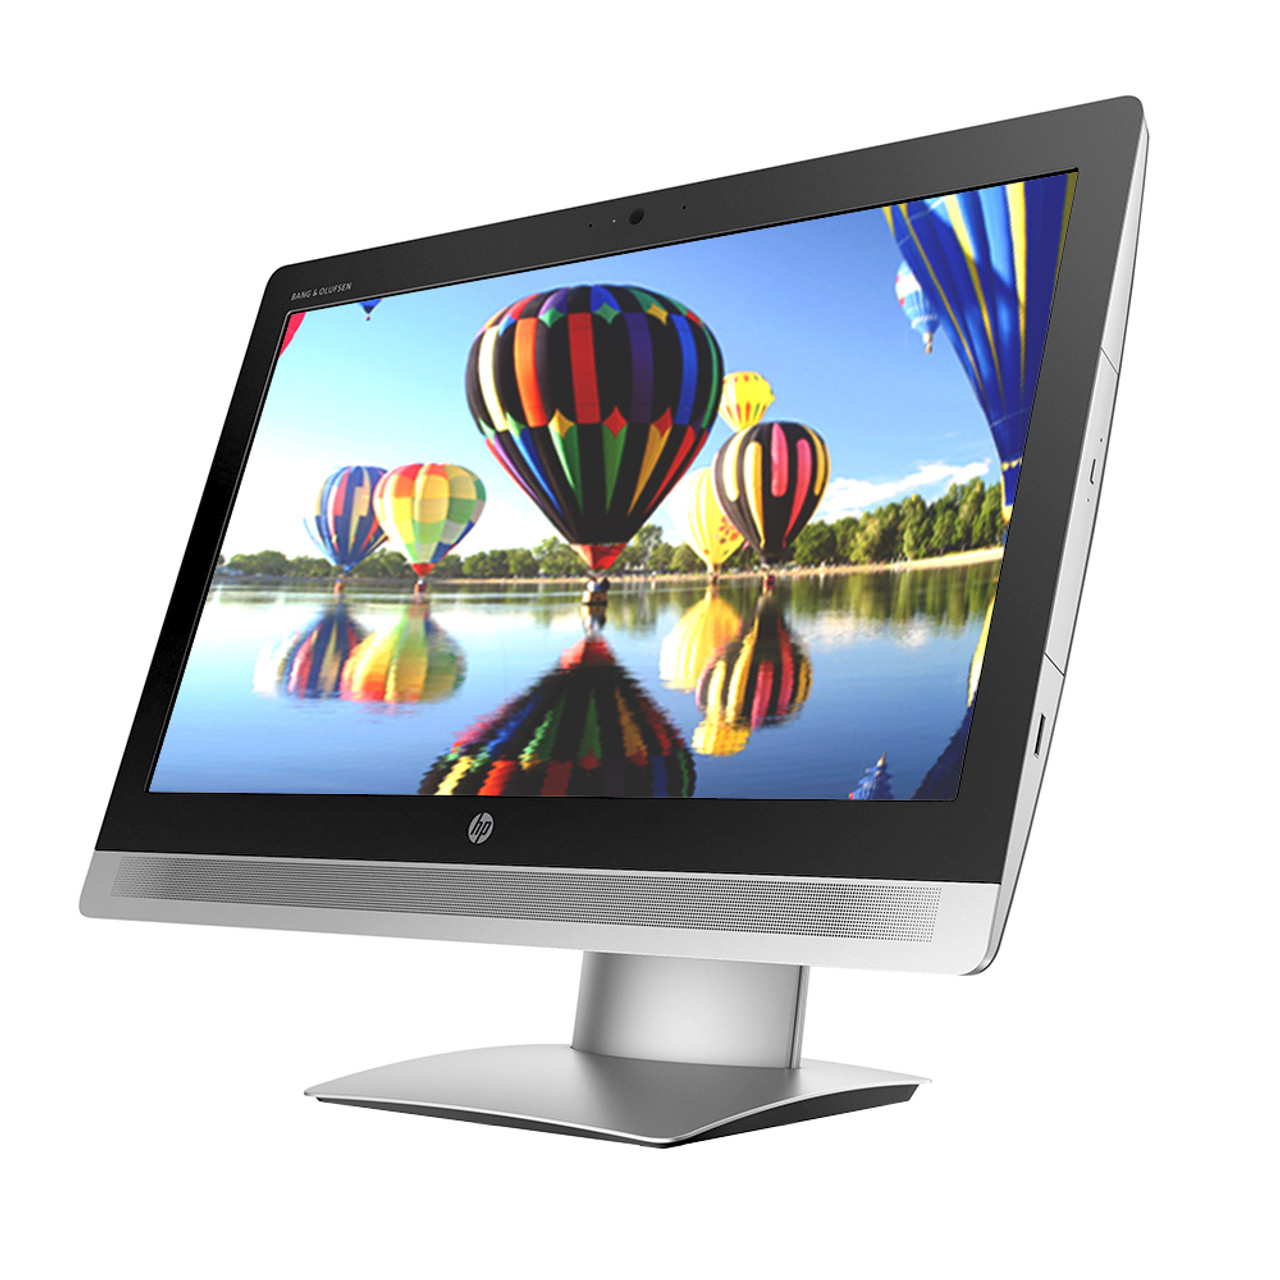 ProOne 600 G2 21.5-inch Touch All-in-One PC (ENERGY STAR)